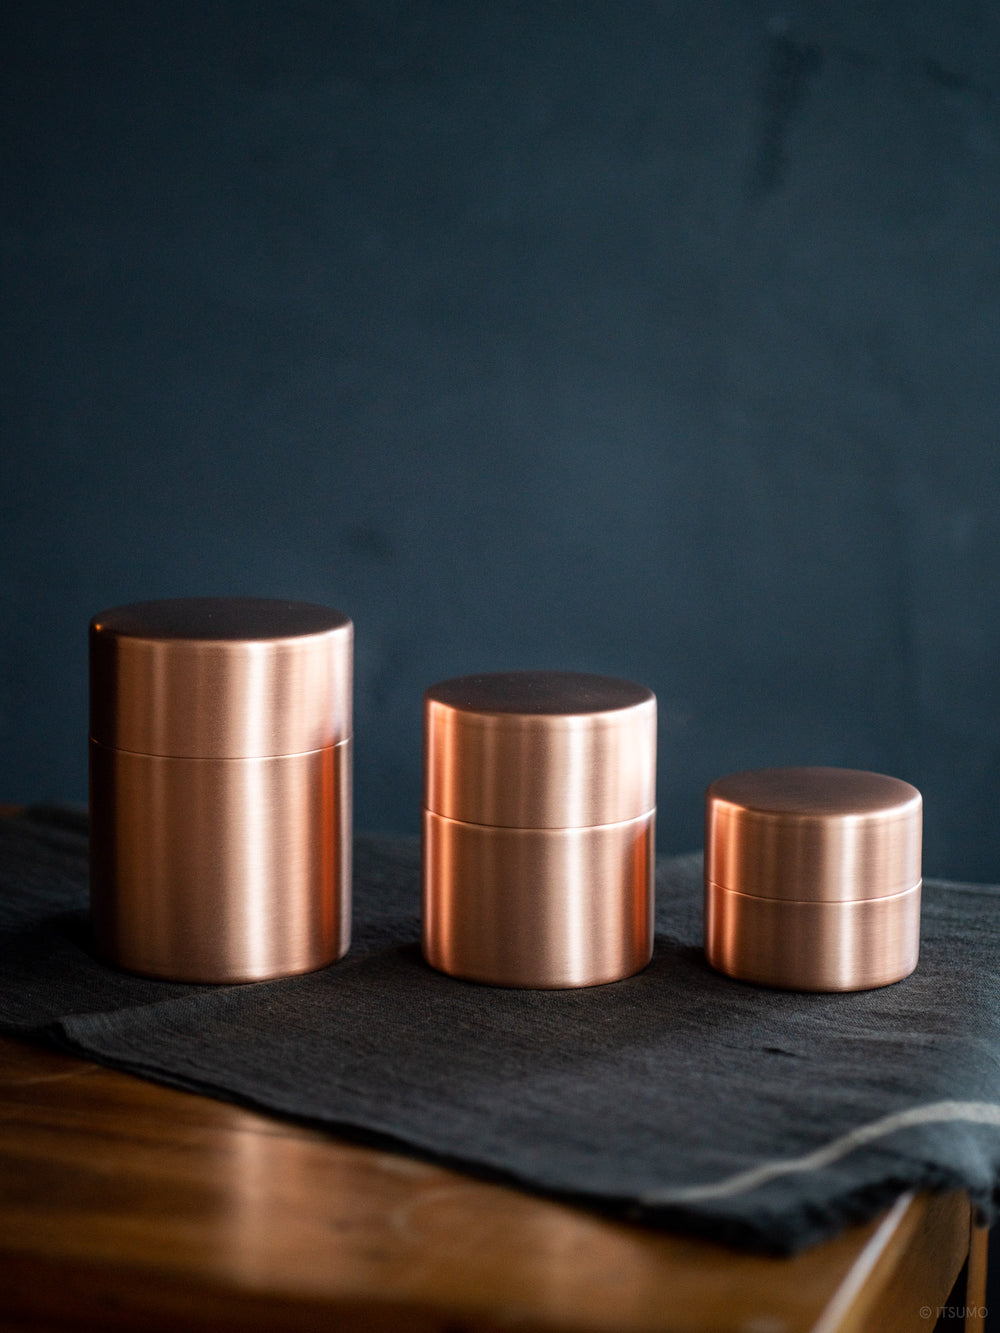 Three Azmaya copper tea canisters next to each showing showing small, medium and large sizes